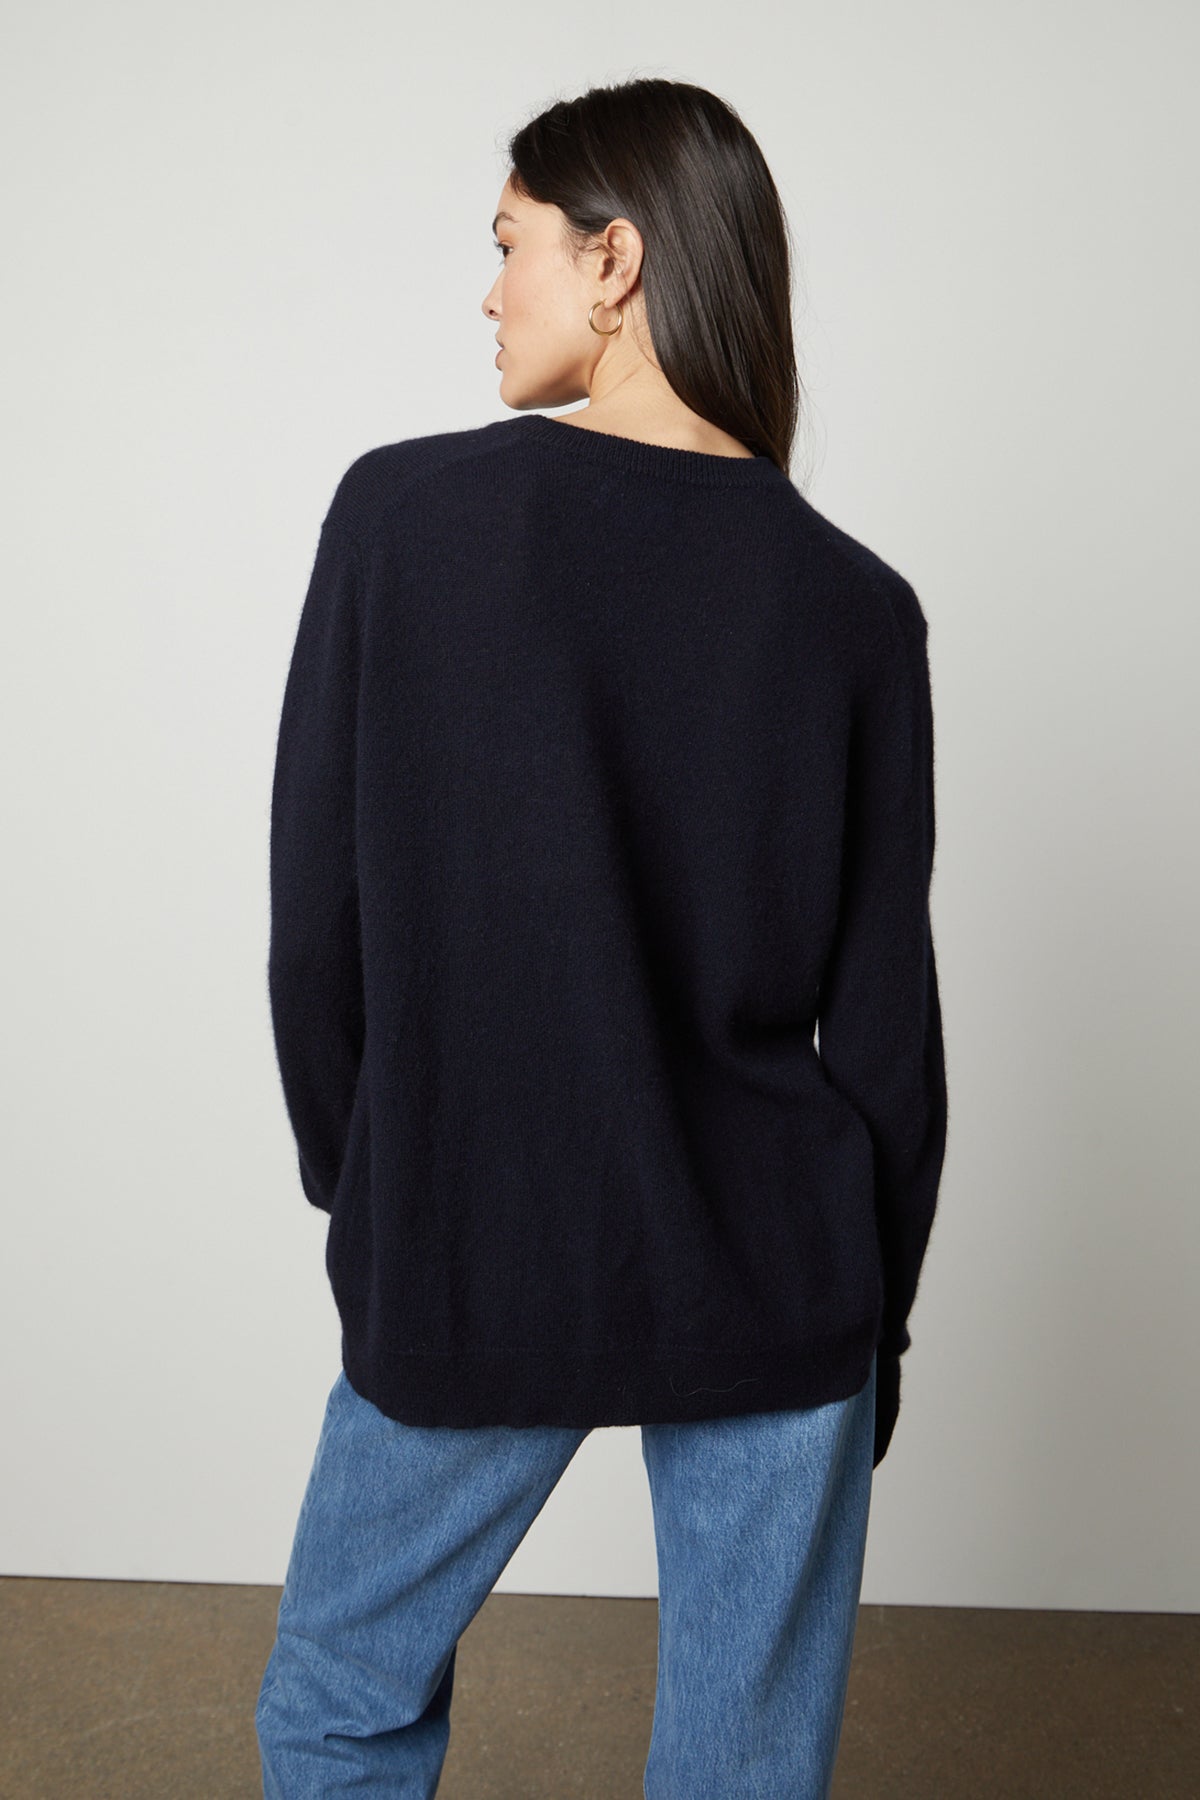 The back view of a woman wearing a Velvet by Graham & Spencer HARMONY CASHMERE V-NECK SWEATER and jeans.-26897789714625